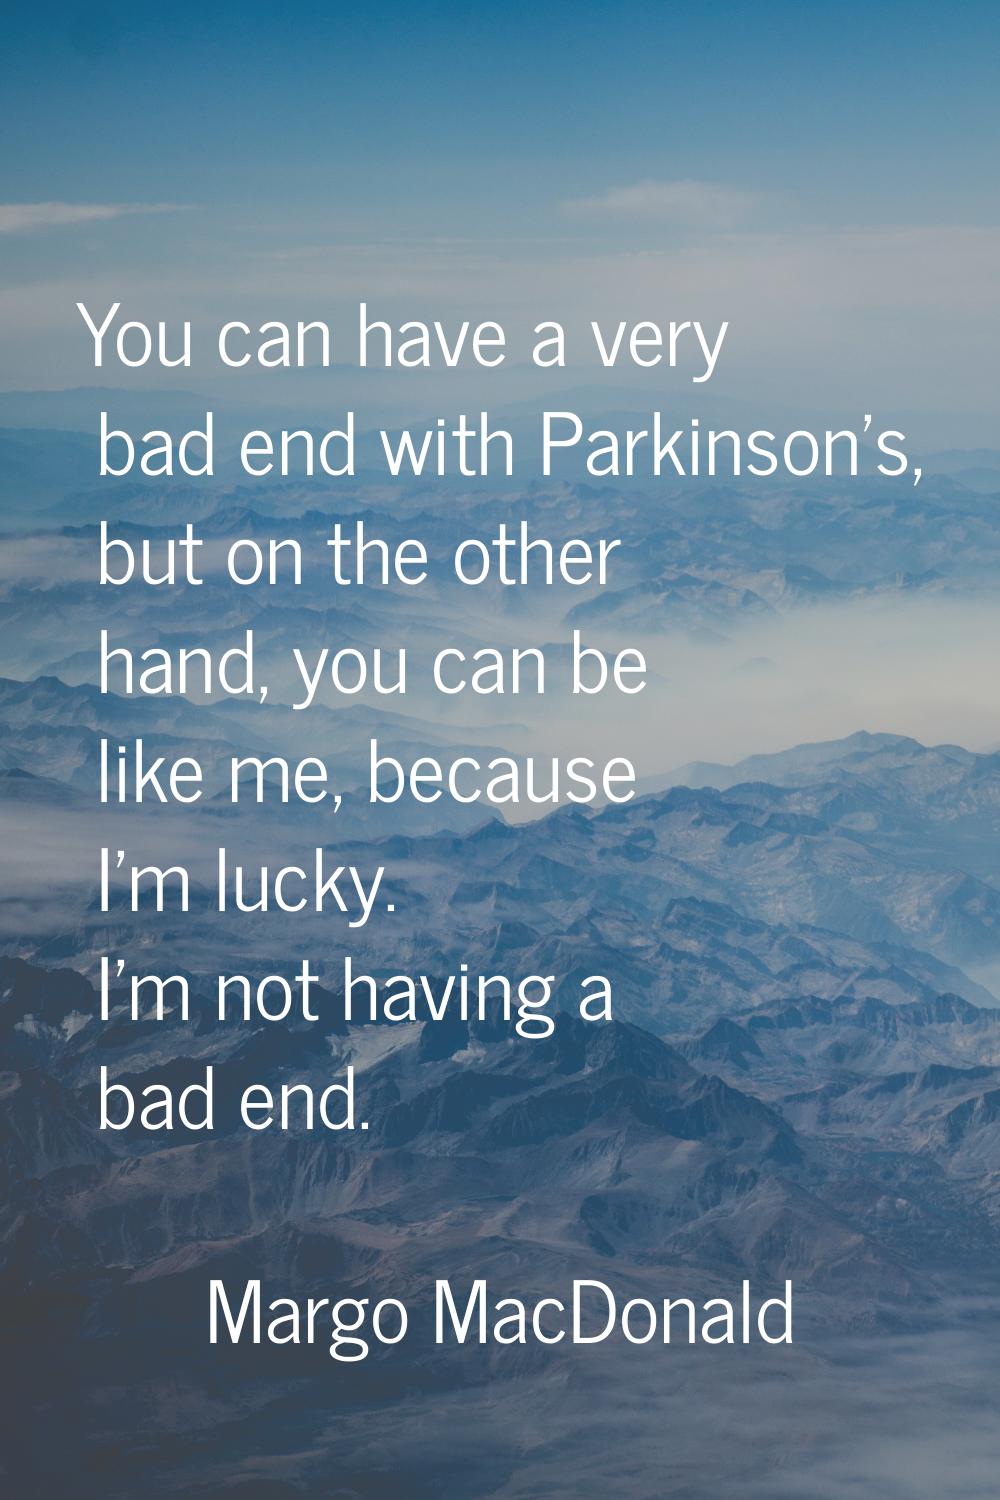 You can have a very bad end with Parkinson's, but on the other hand, you can be like me, because I'